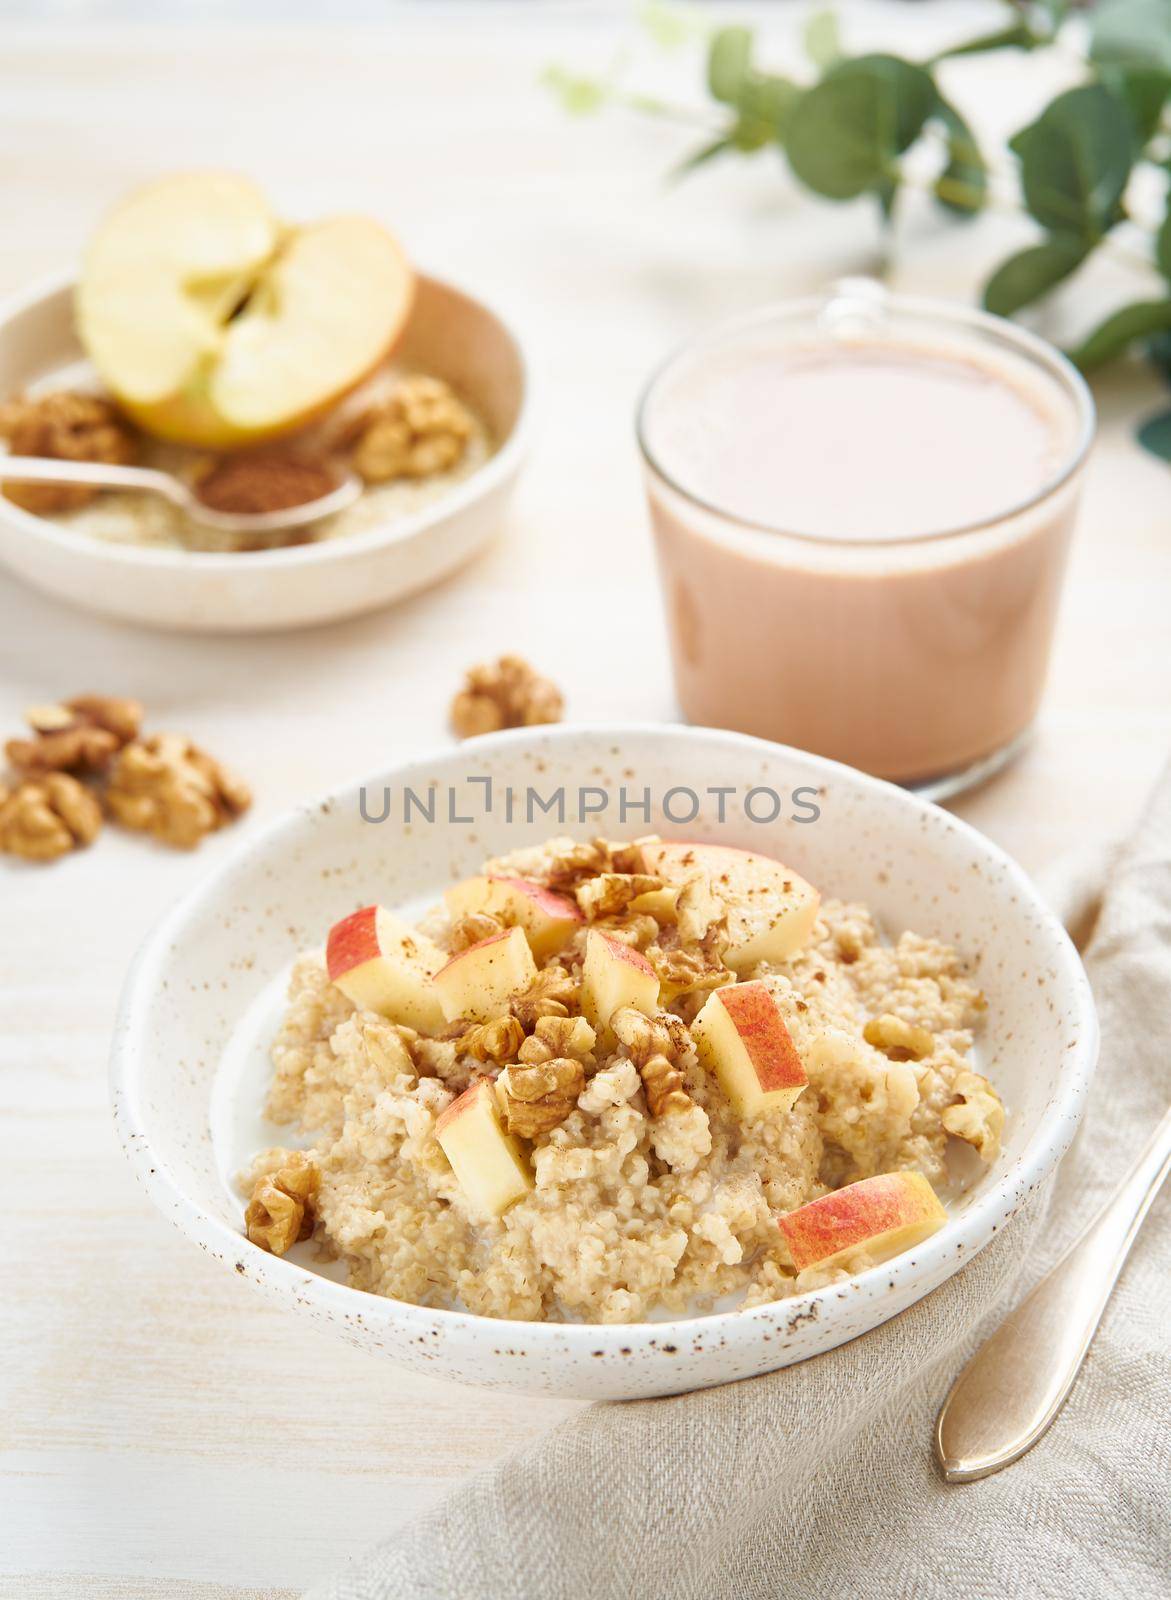 Oatmeal with apple, nuts, honey and cup of chocolate on white wooden light background. Vertical. Healthy diet breakfast